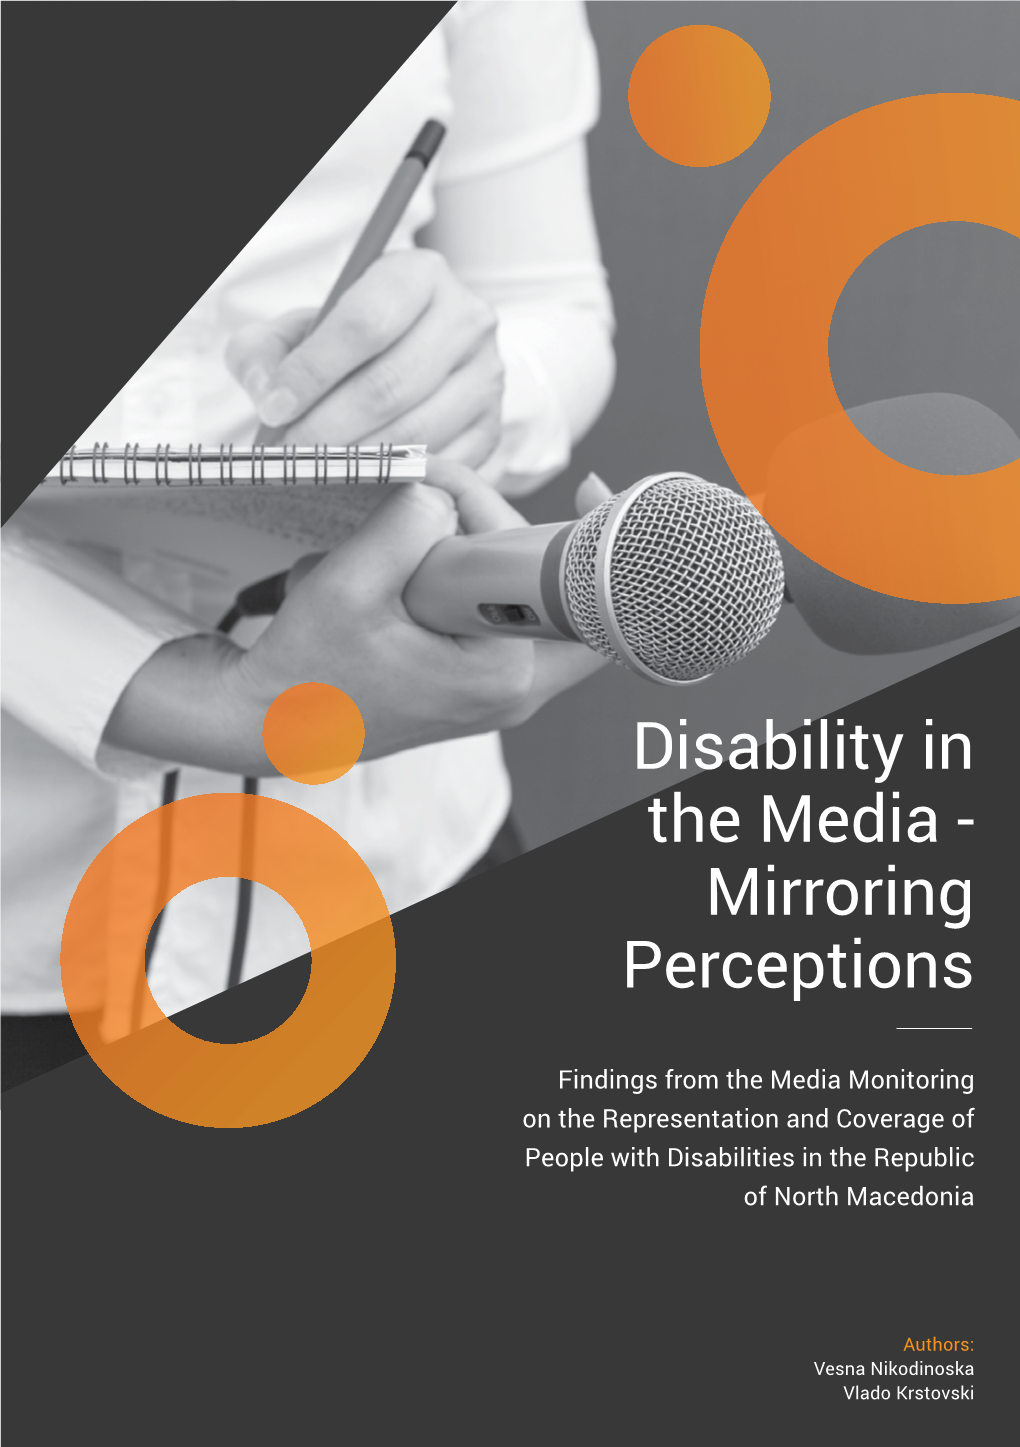 Disability in the Media - Mirroring Perceptions